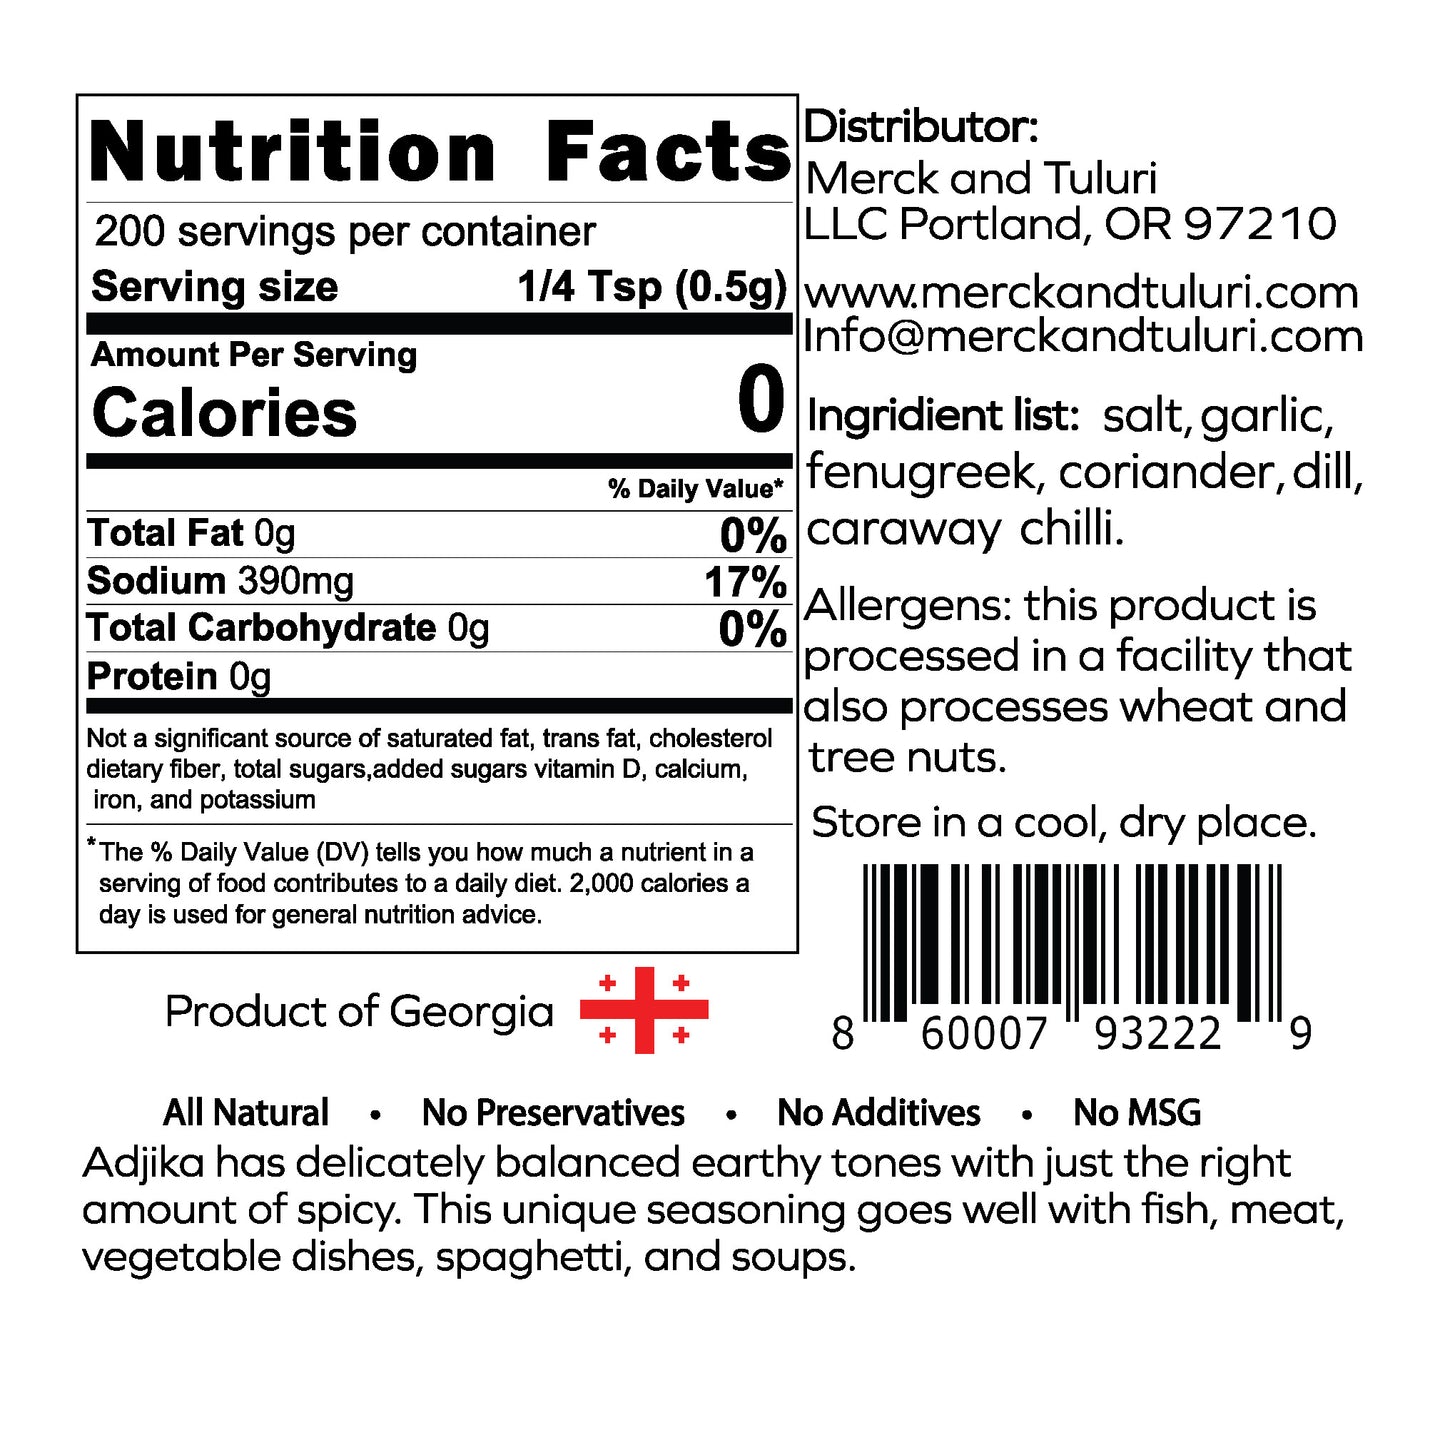 A paper slip showing nutritional facts about our spicy adjika seasoning and barcode.